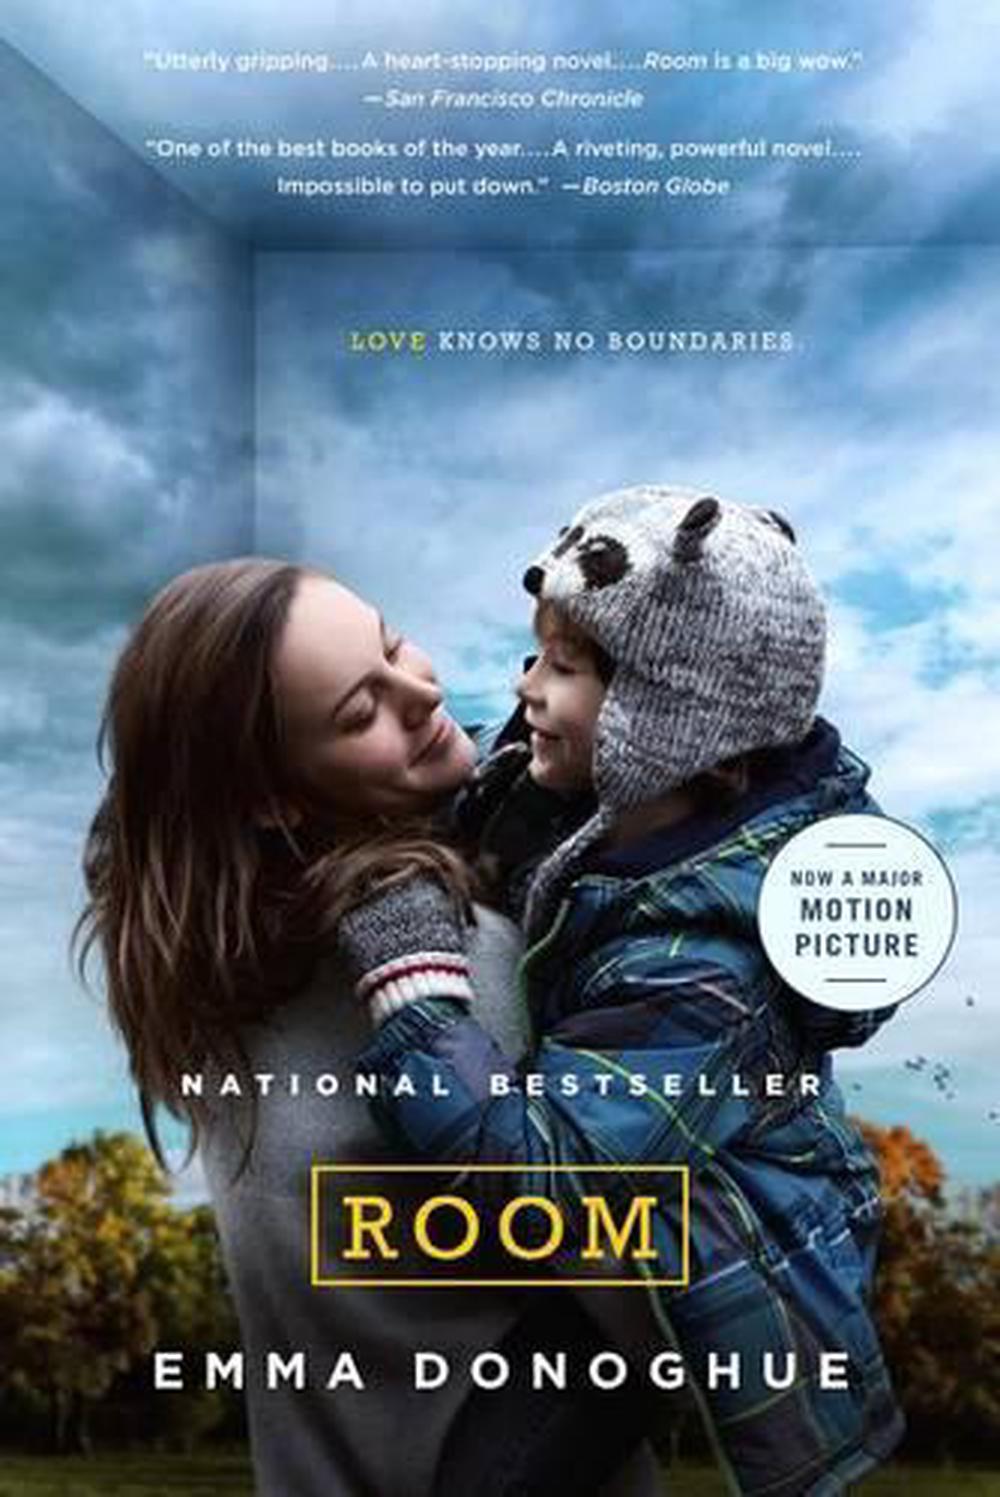 room book review goodreads